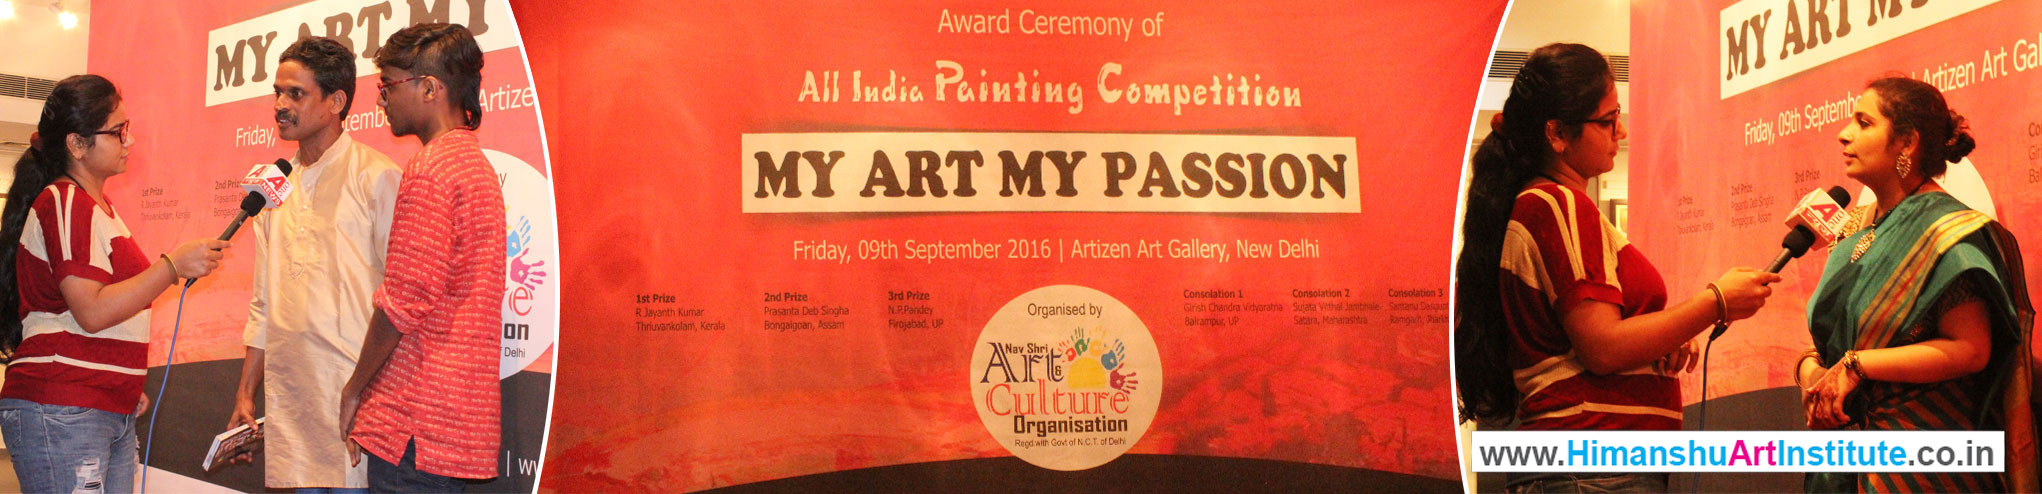 All India Painting Competition, My Art My Passion